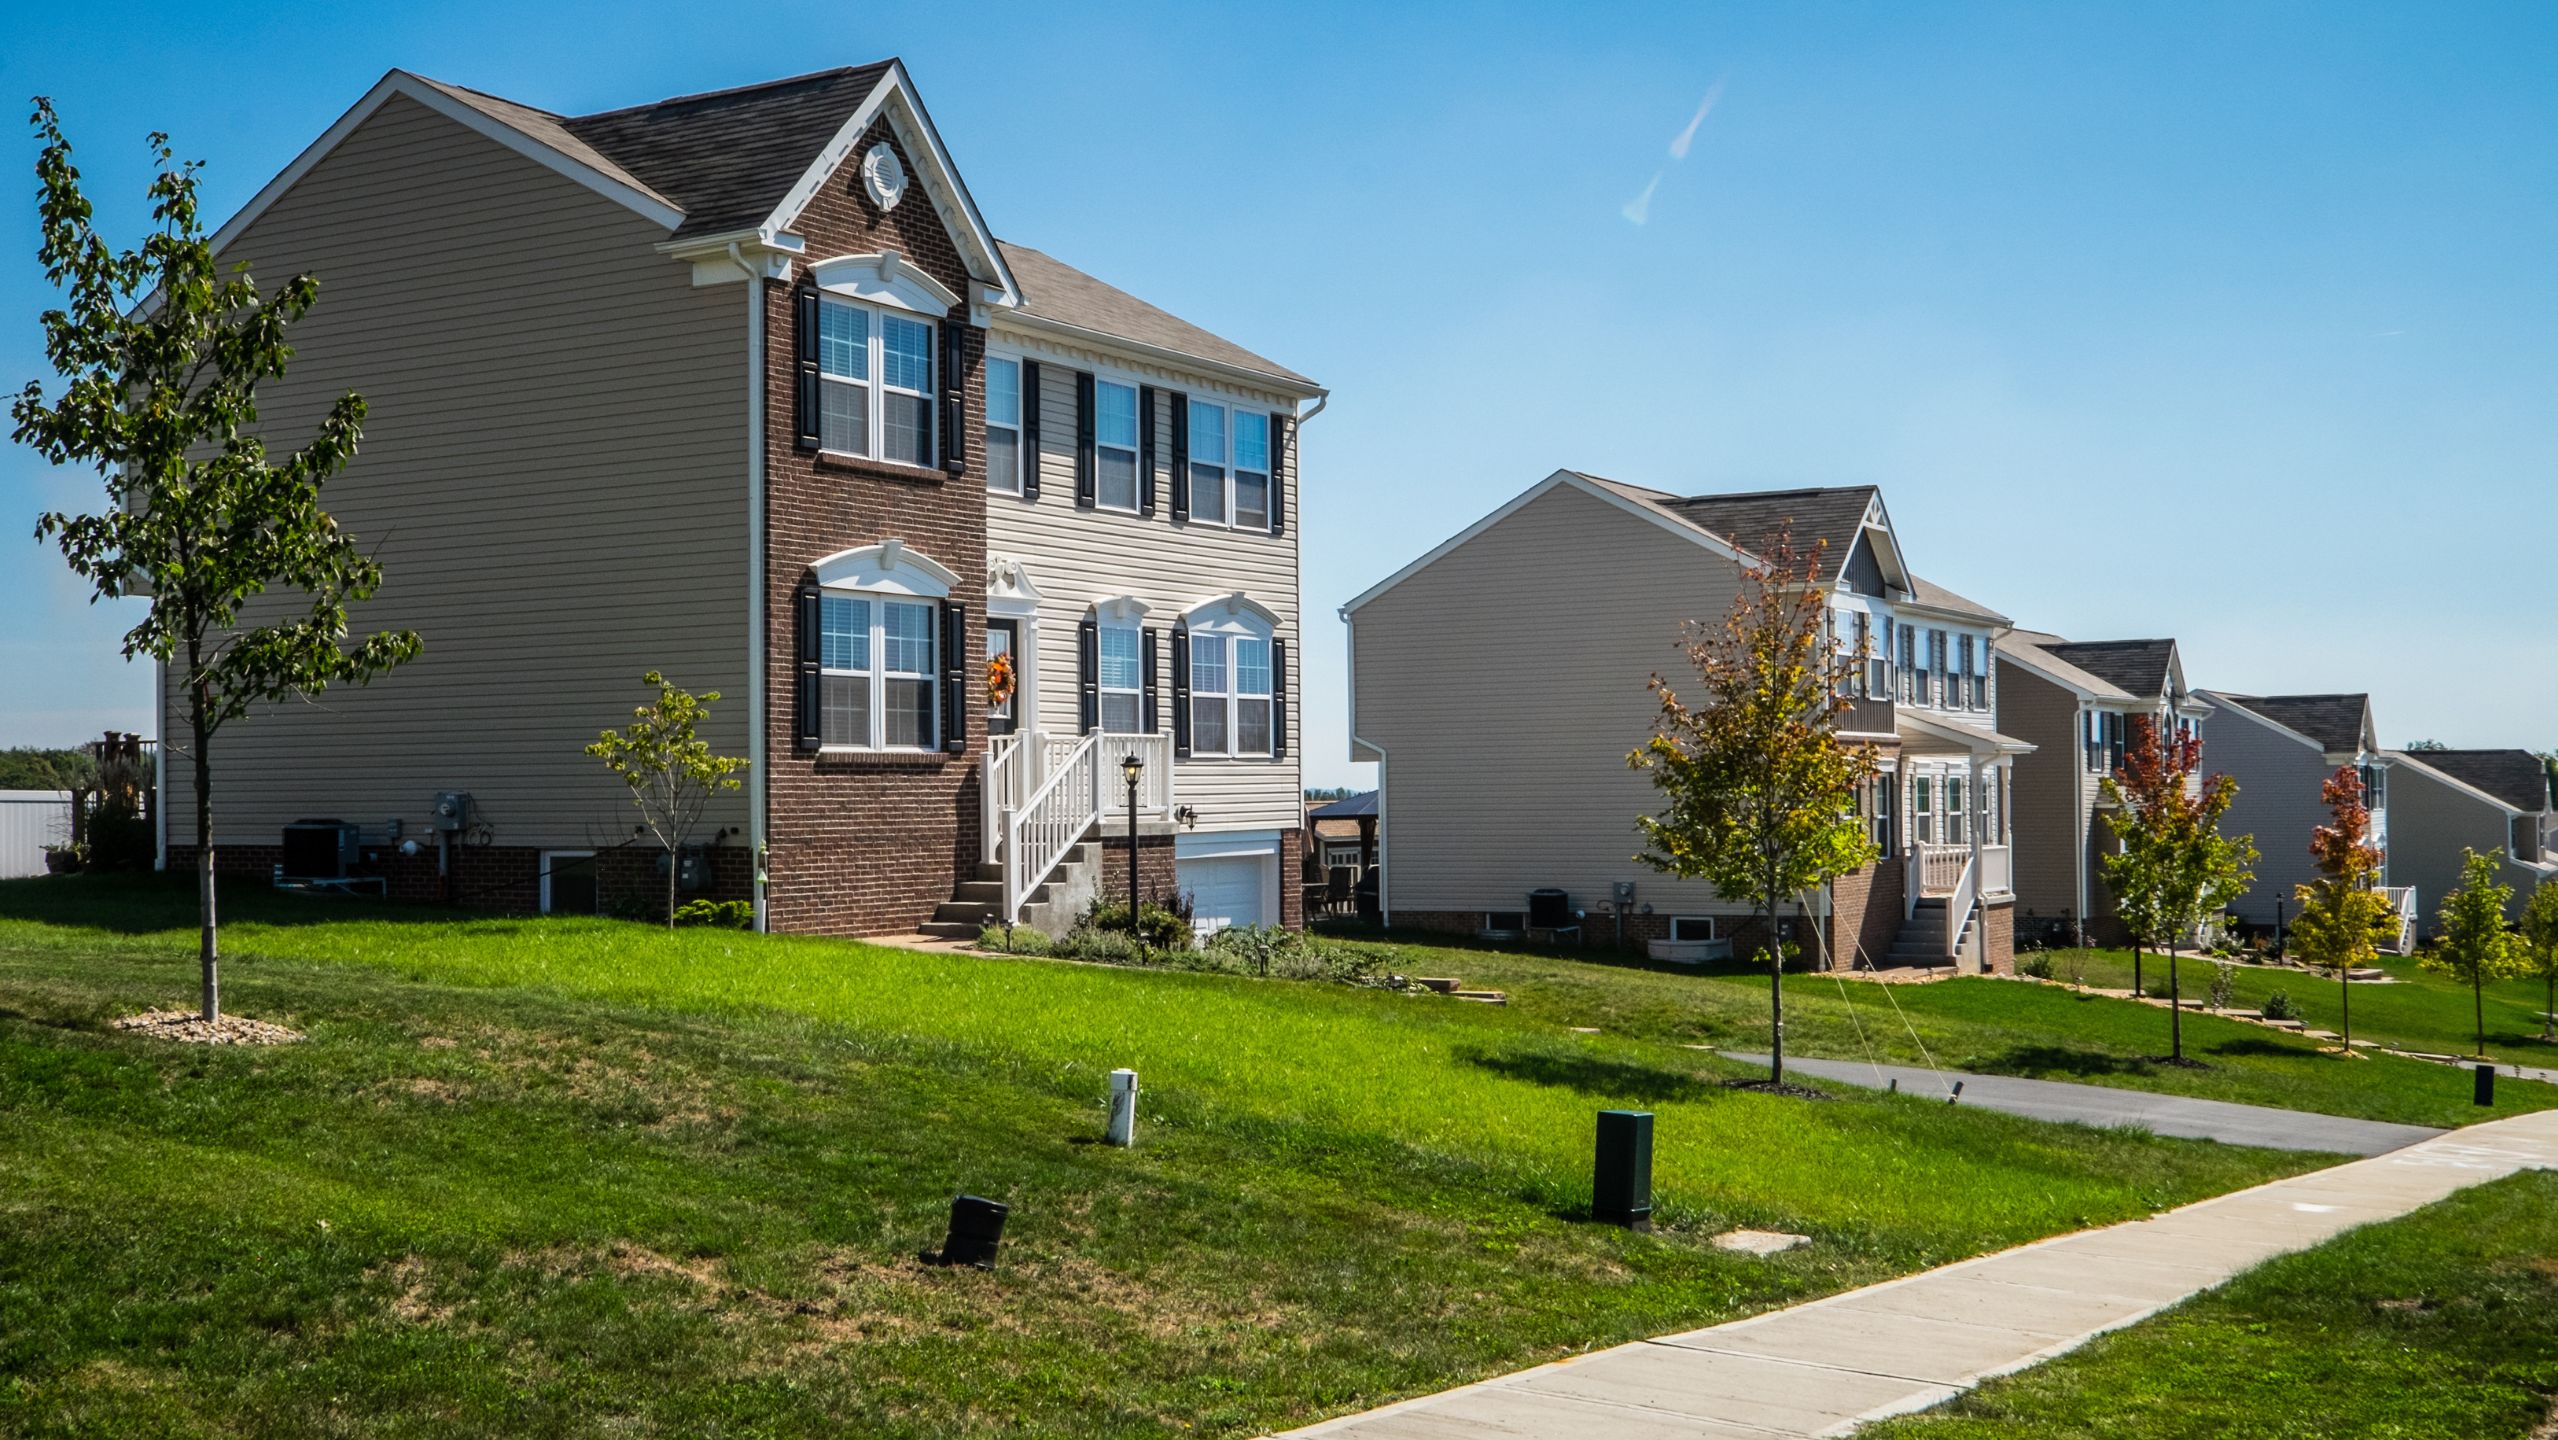 New homes for sale in Beaver, PA